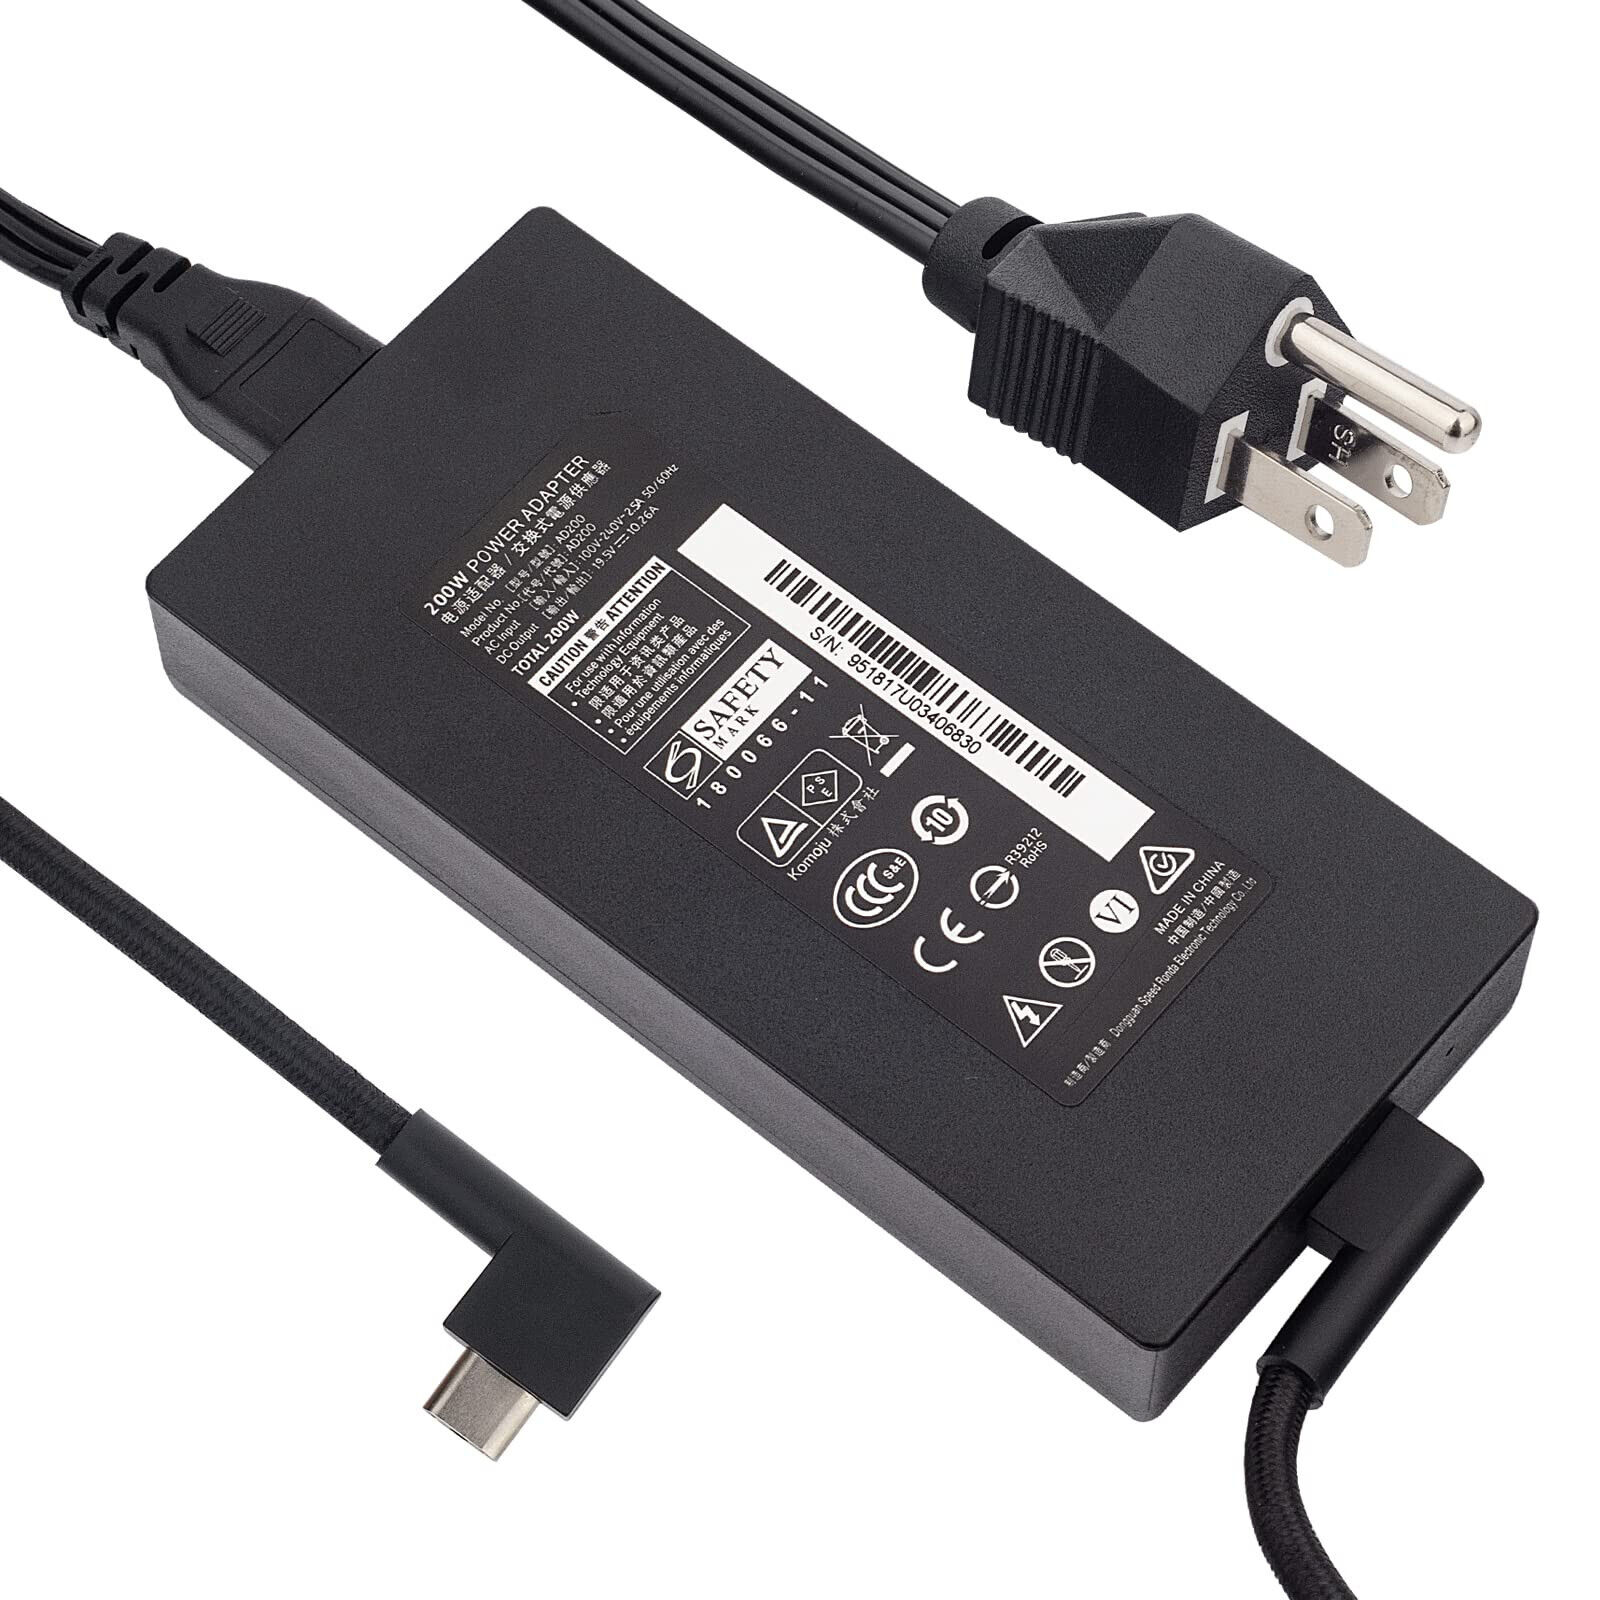 200W Laptop AC Adapter Power Supply Compatible with Razer Blade 15 RZ09-0287 pro